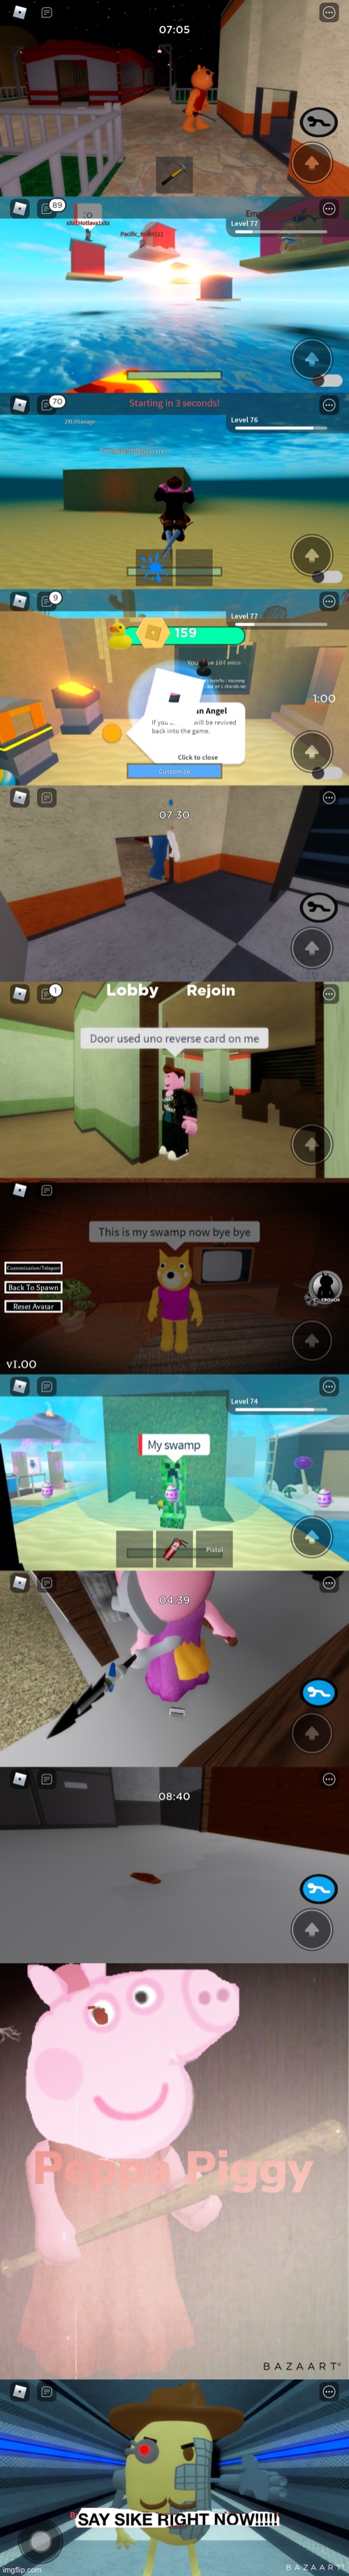 Gaming Roblox Memes Gifs Imgflip - extremely cursed roblox memes 2